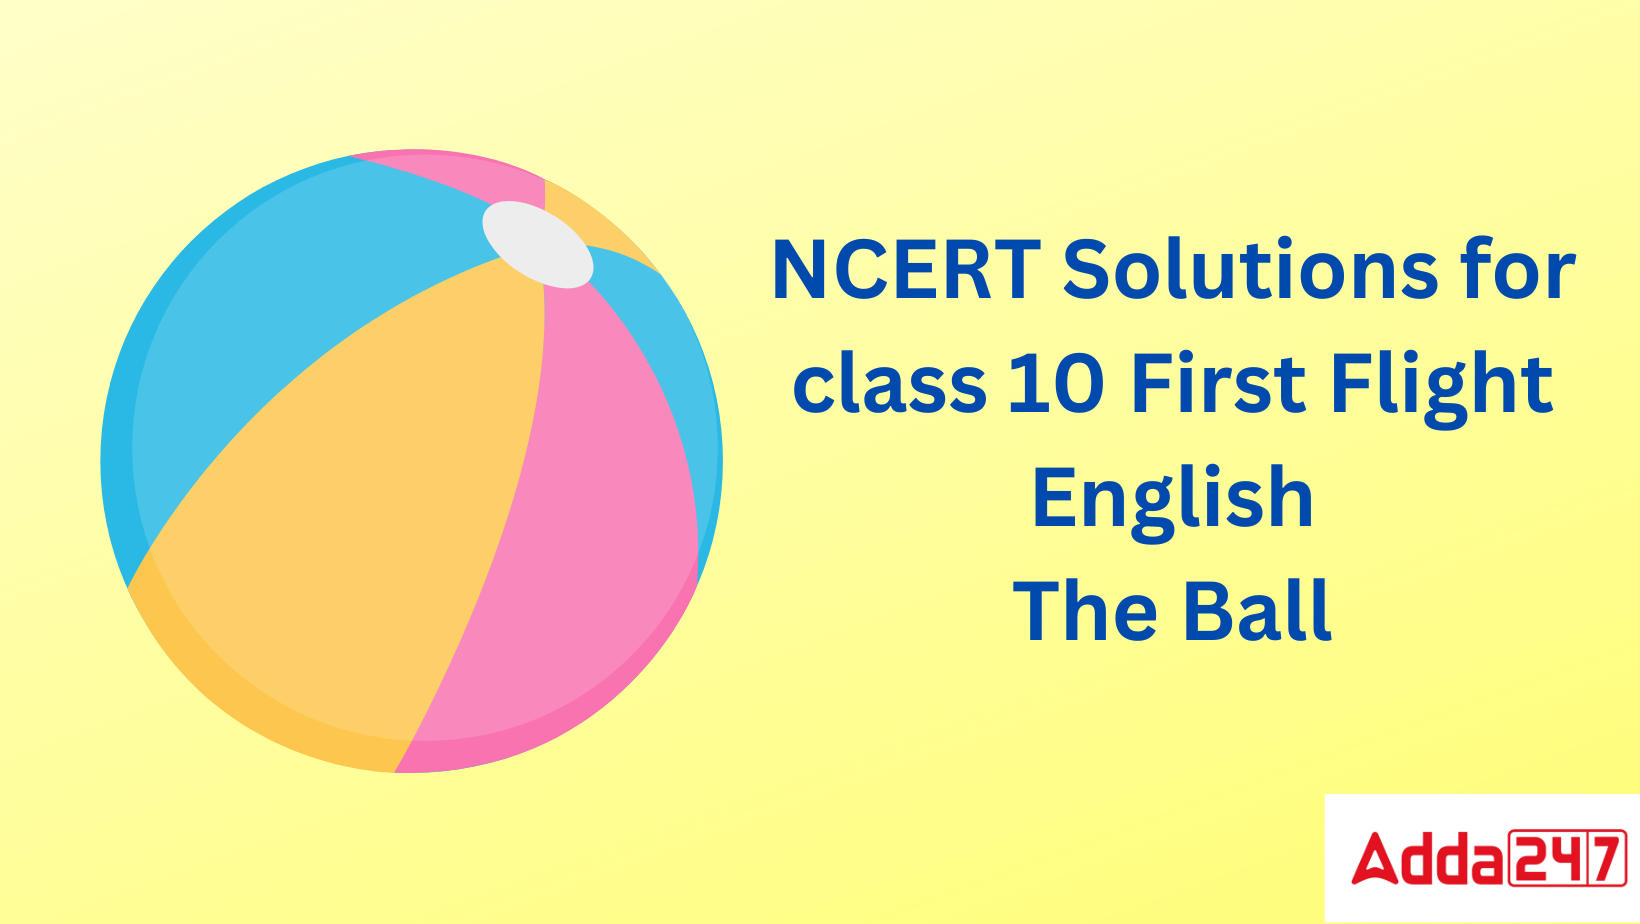 NCERT Solutions for class 10 First Flight English The Ball